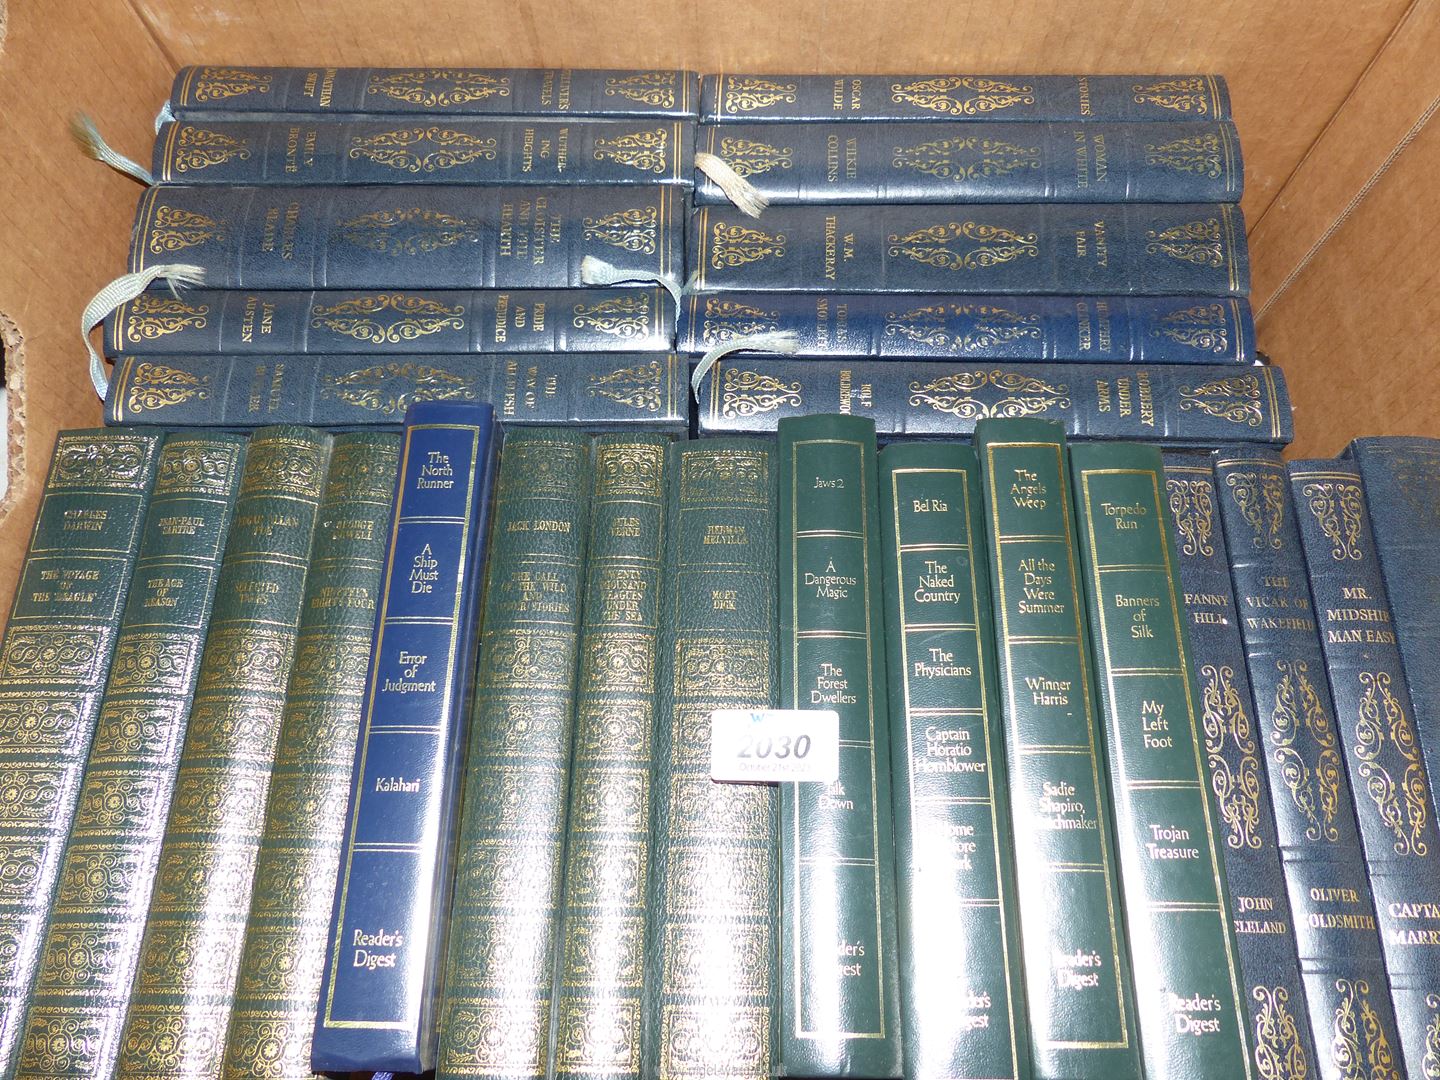 A quantity of Readers Digest and Heron Books to include Jane Austin, Oscar Wilde, etc.